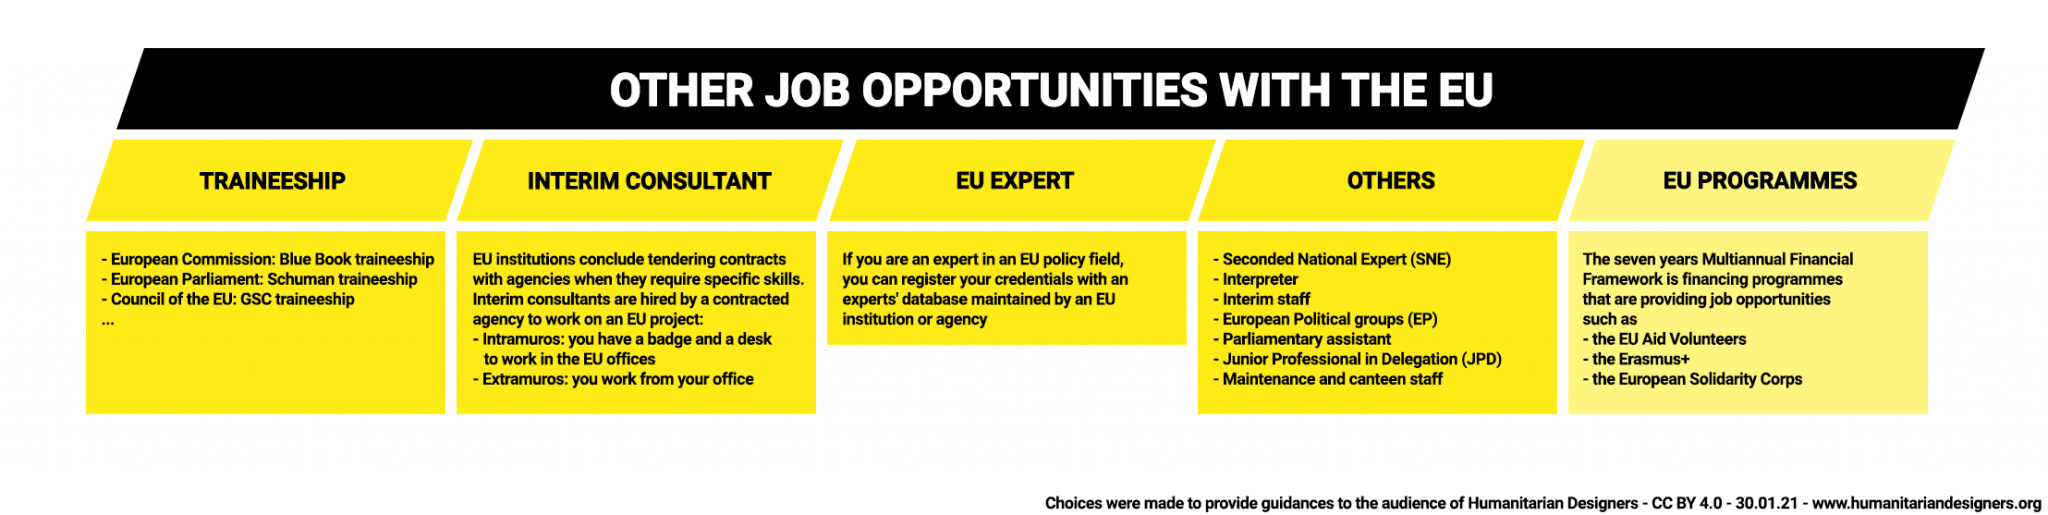 EU Other job opportunities with the EU - EPSO